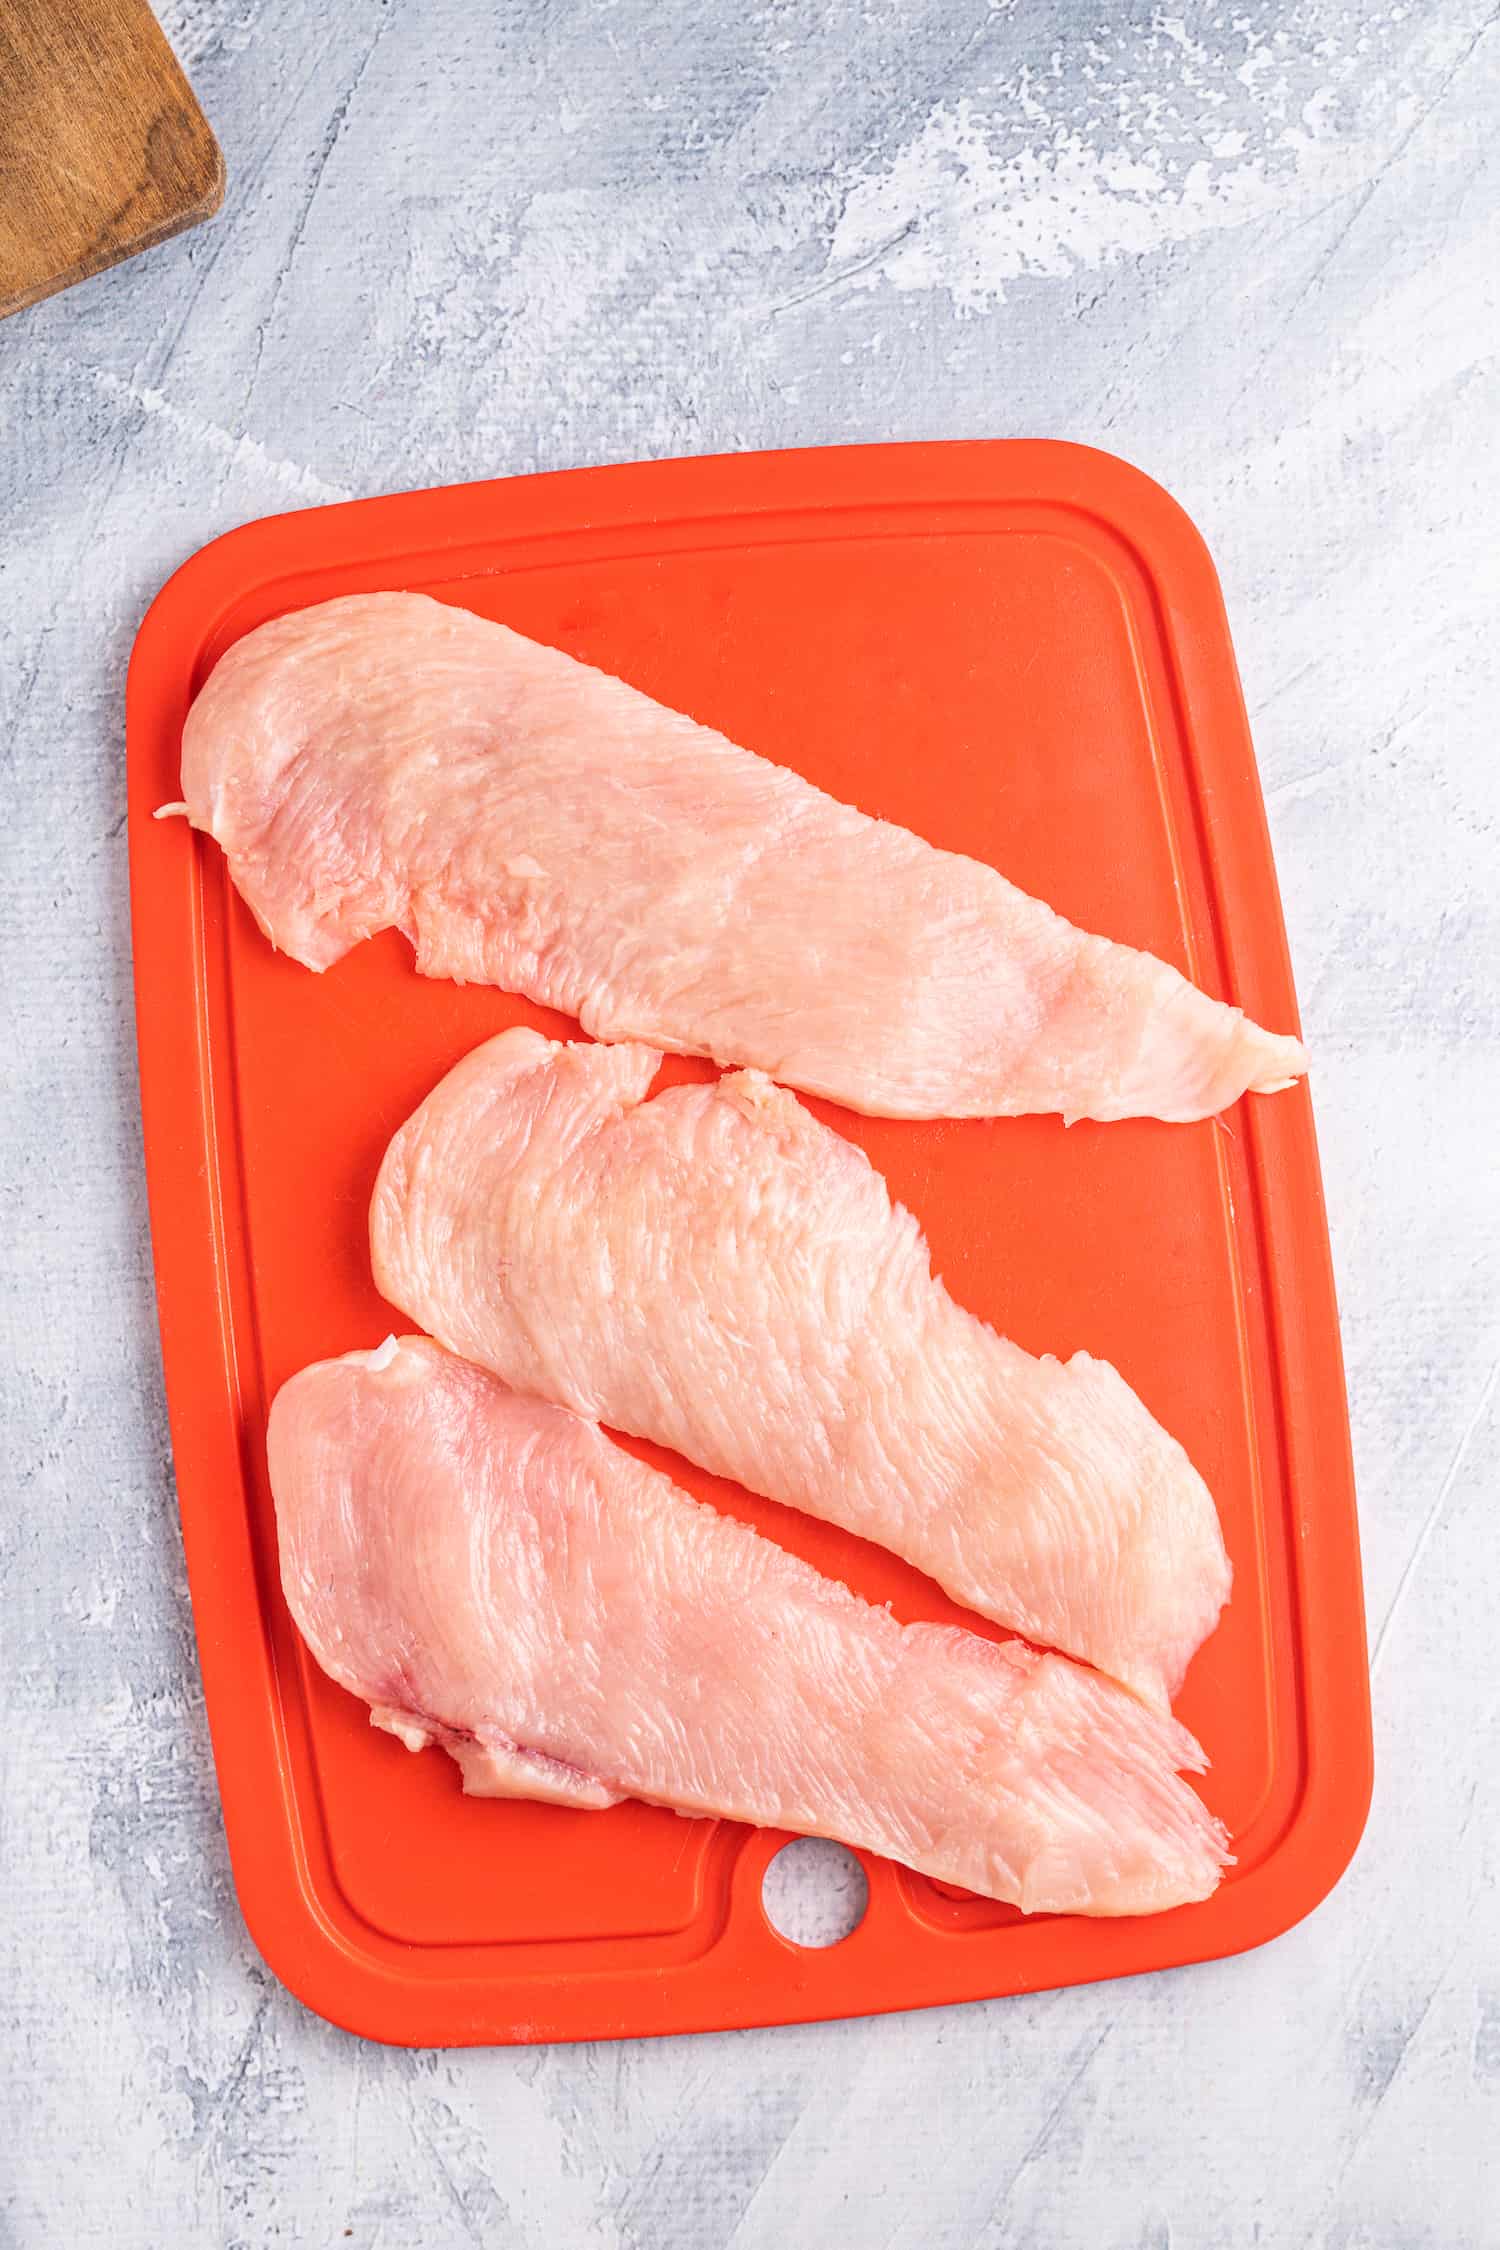 Thinly sliced chicken fillets on a red chopping board.